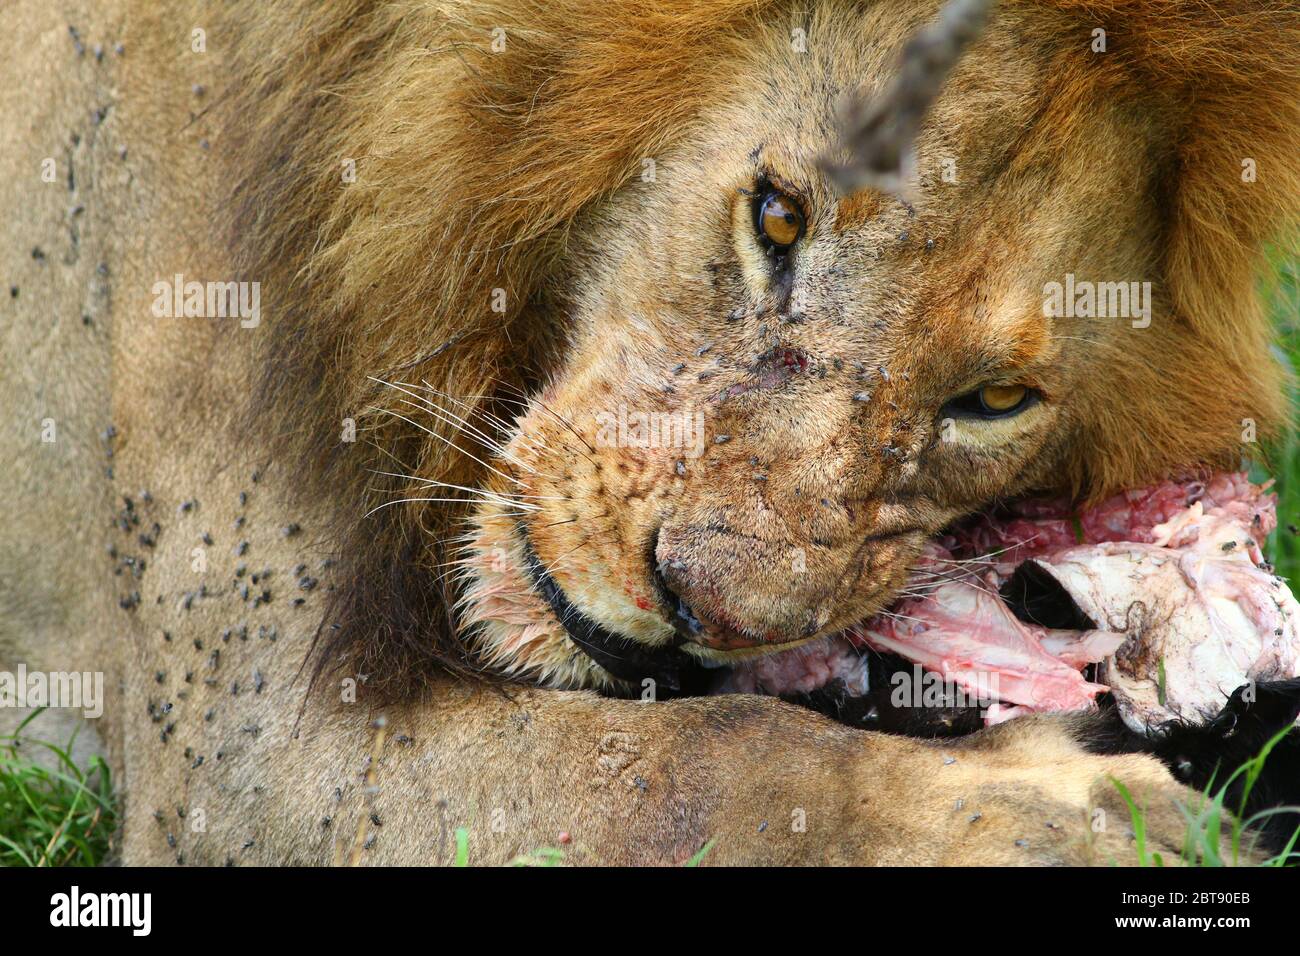 a large male lion with a blood-smeared mouth eats the freshly torn prey of a buffalo calf, close-up Stock Photo